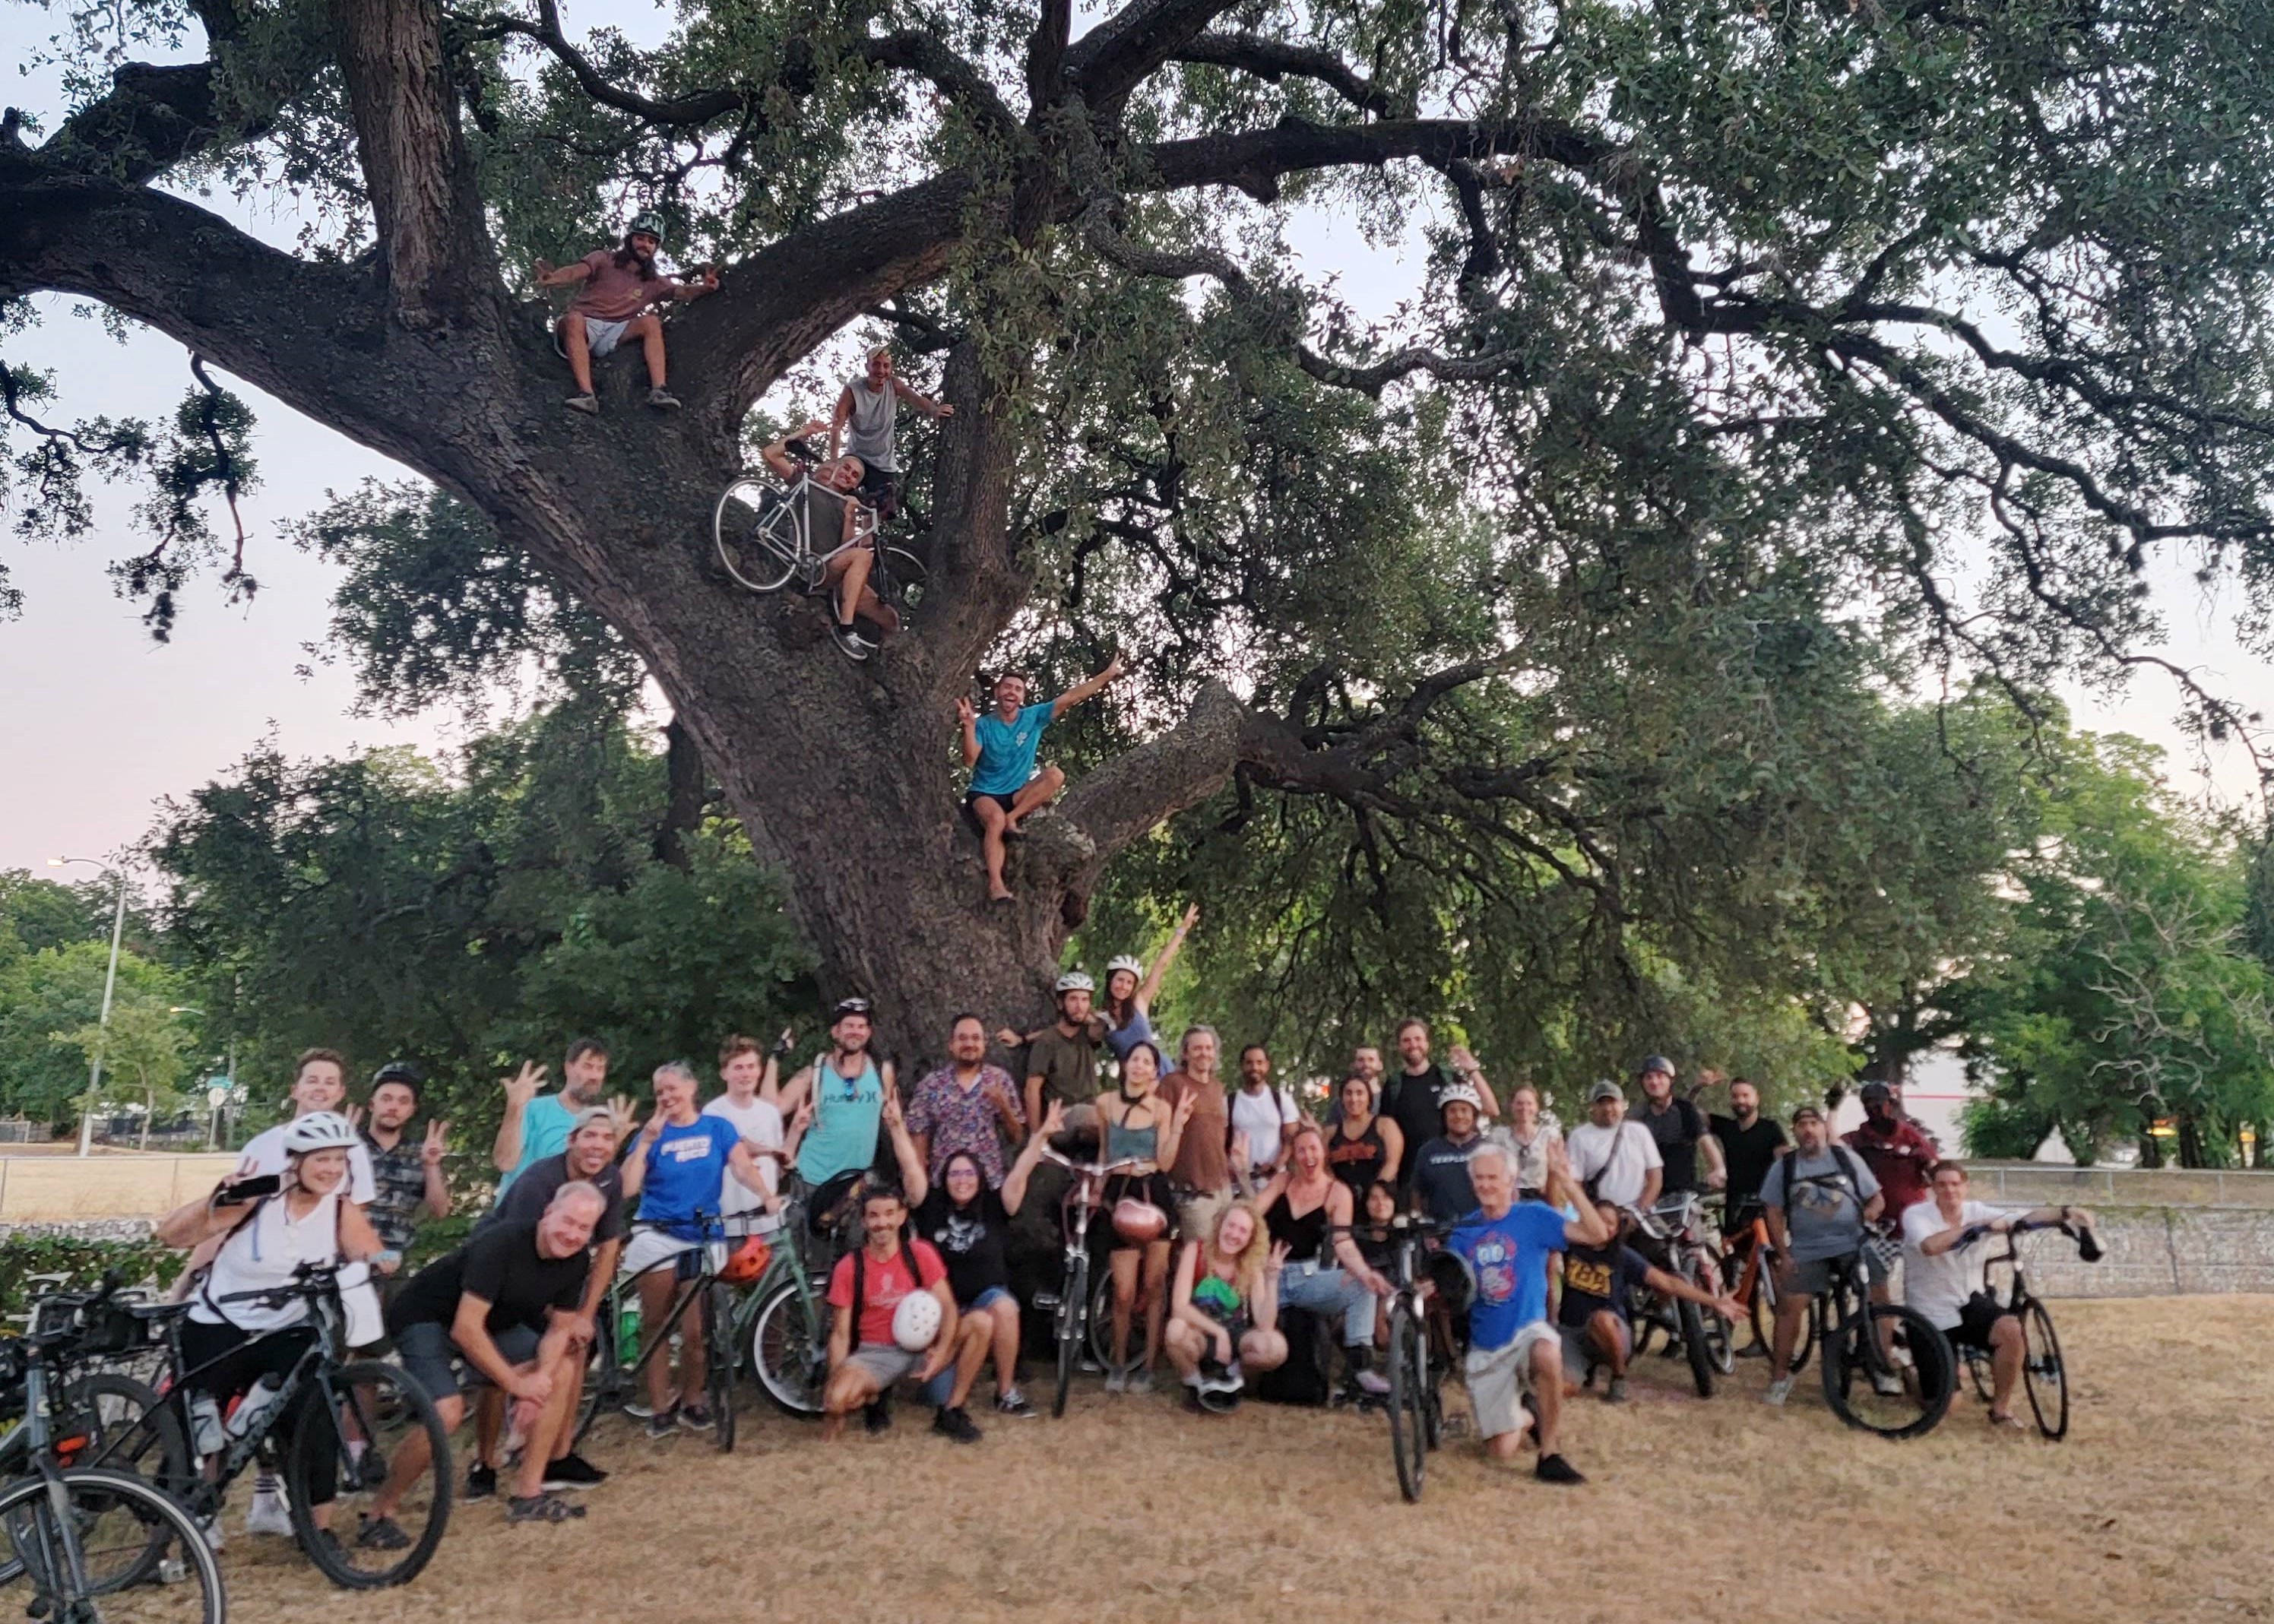 A Ride Bikes Austin meet-up with bikes in front of a tree in Parque Zaragoza